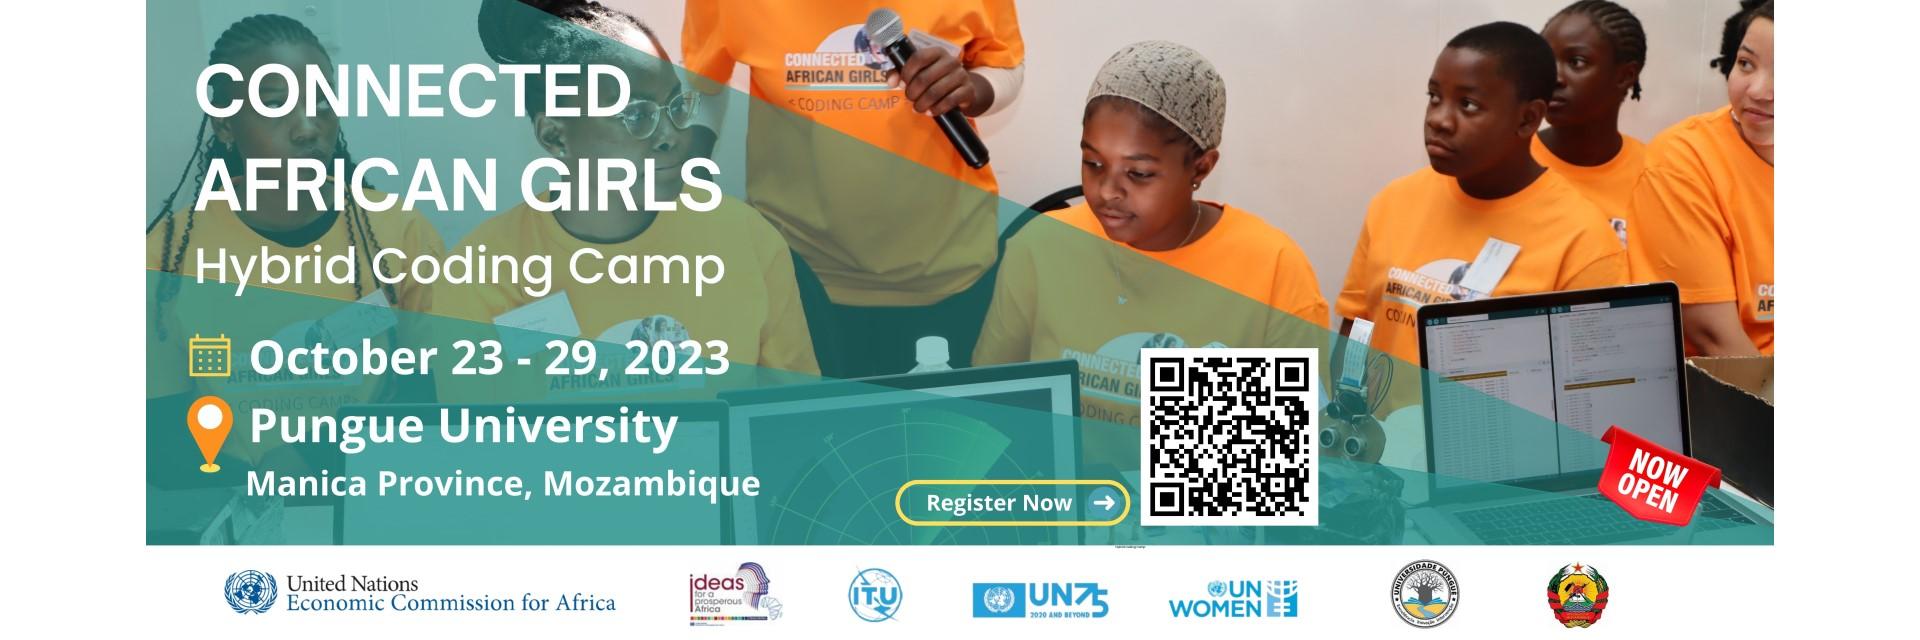 Connected African Girls (8th Edition) Coding Camp to elevate digital skills in Lusophone countries